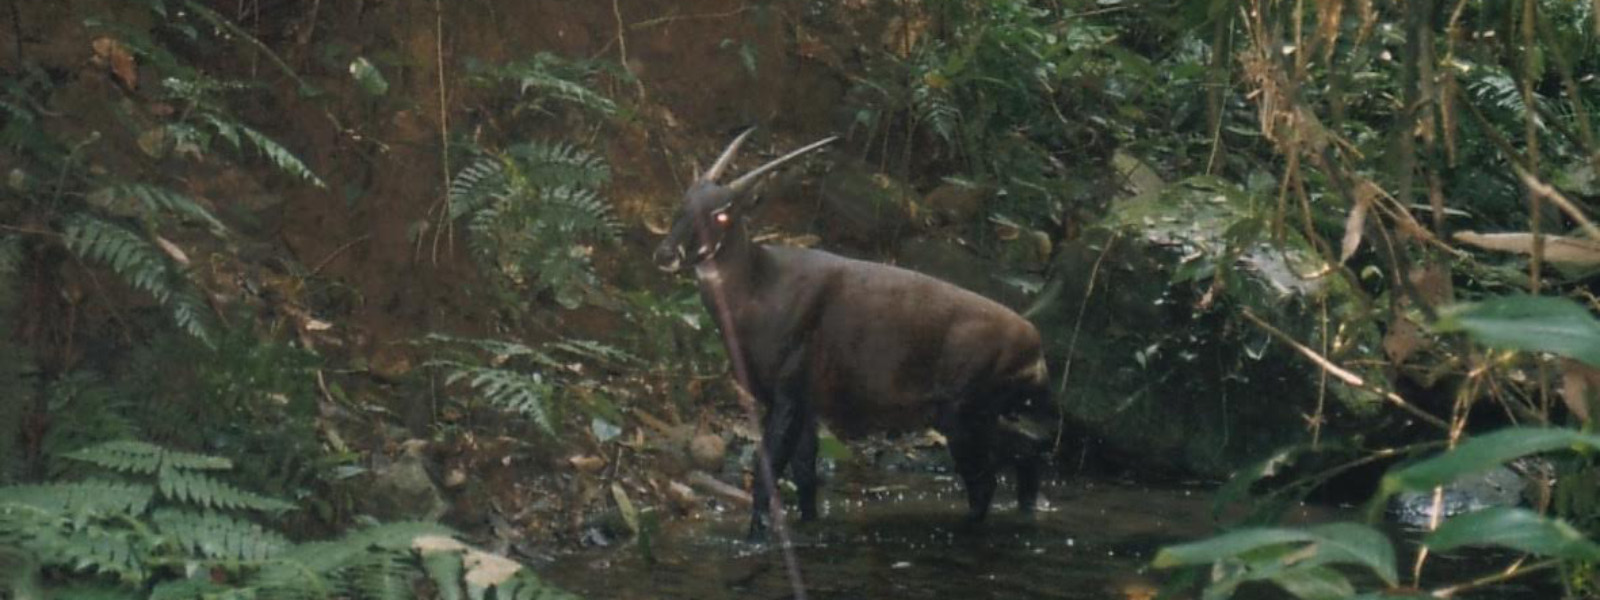 the saola one of the world's rarest mammals